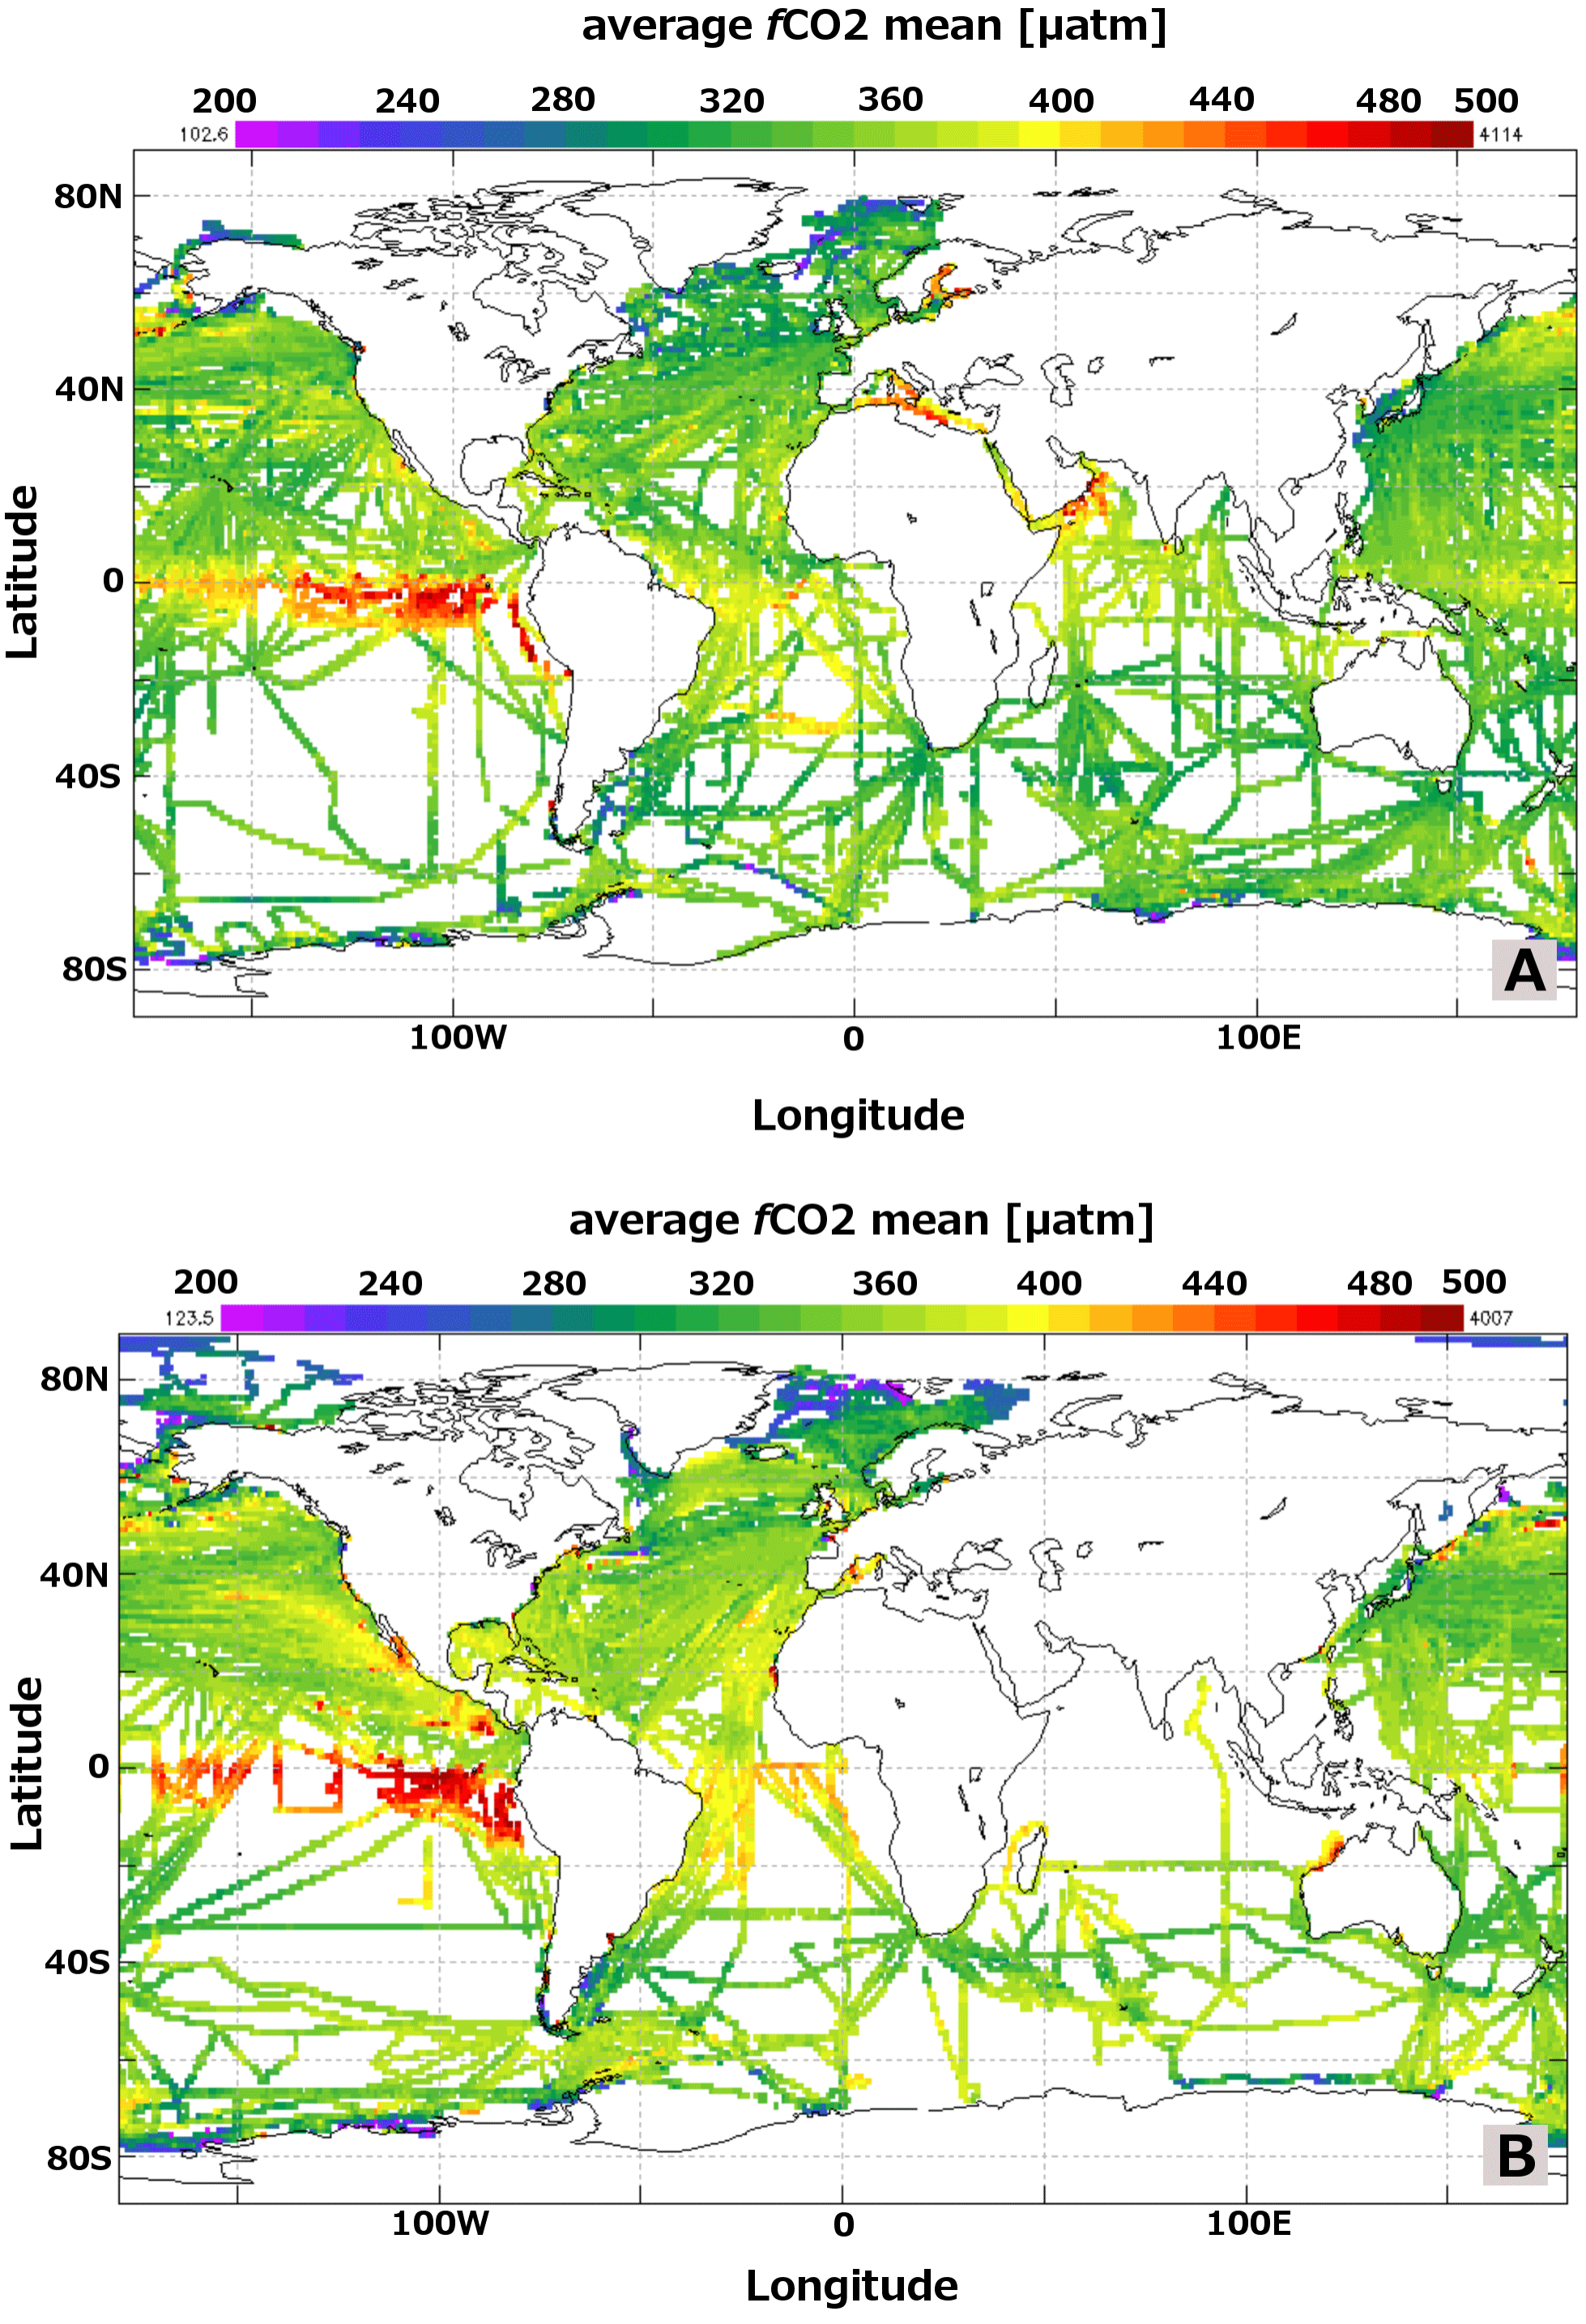 Mean unweighted surface water fCO2 (μatm) for the years 1970–2002 (a) and 2003–2011 (b) using the SOCATv2 monthly 11 degree gridded data set (Bakker et al., 2014). The maps were generated by using the online Live Access Server.